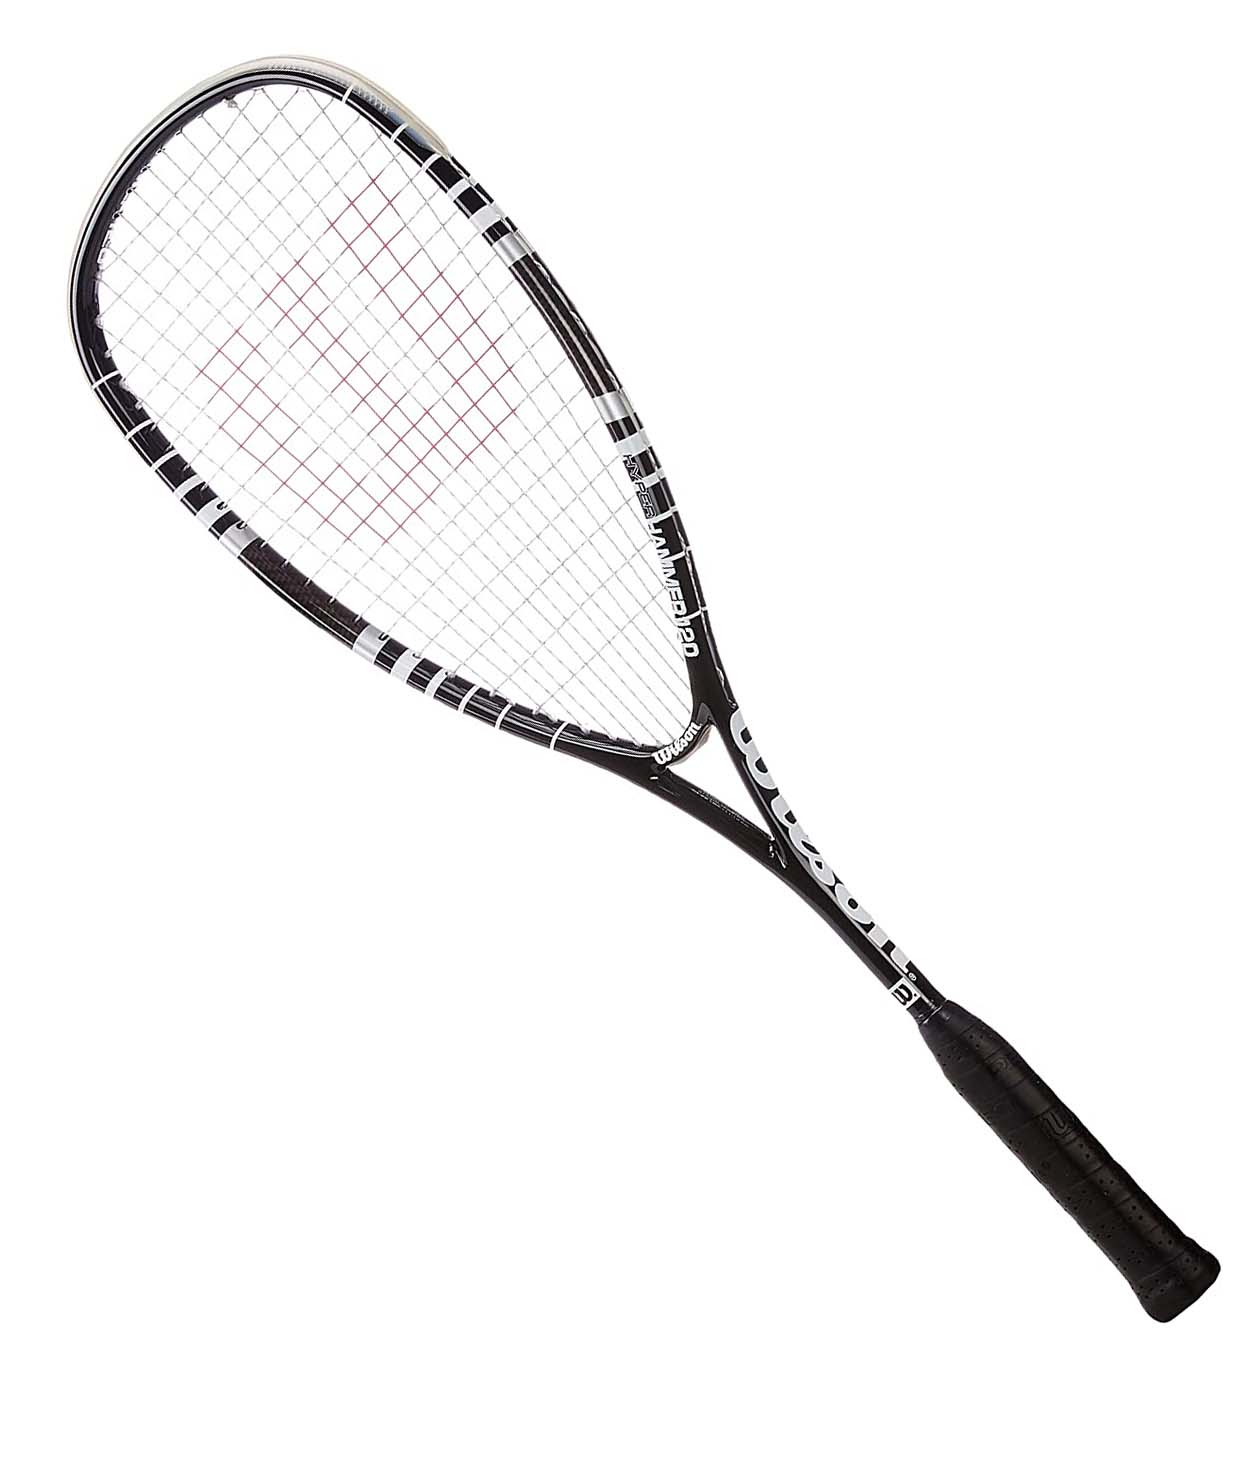 Wilson Hammer squash racket for power and control